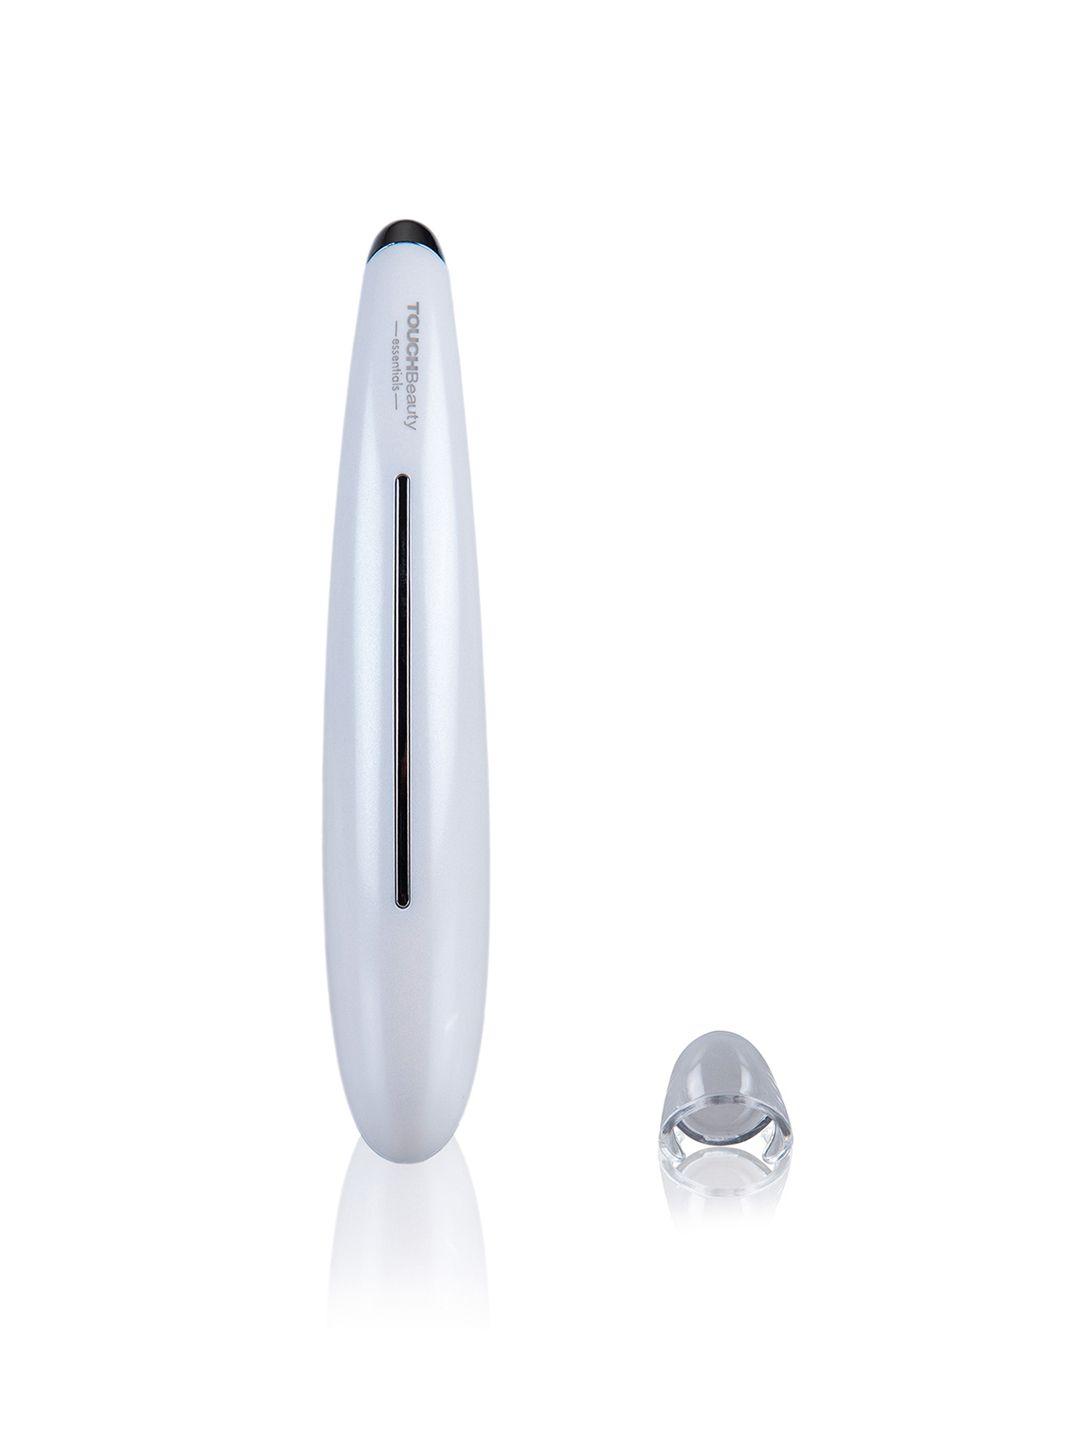 touch beauty anti-ageing wrinkle eye massager